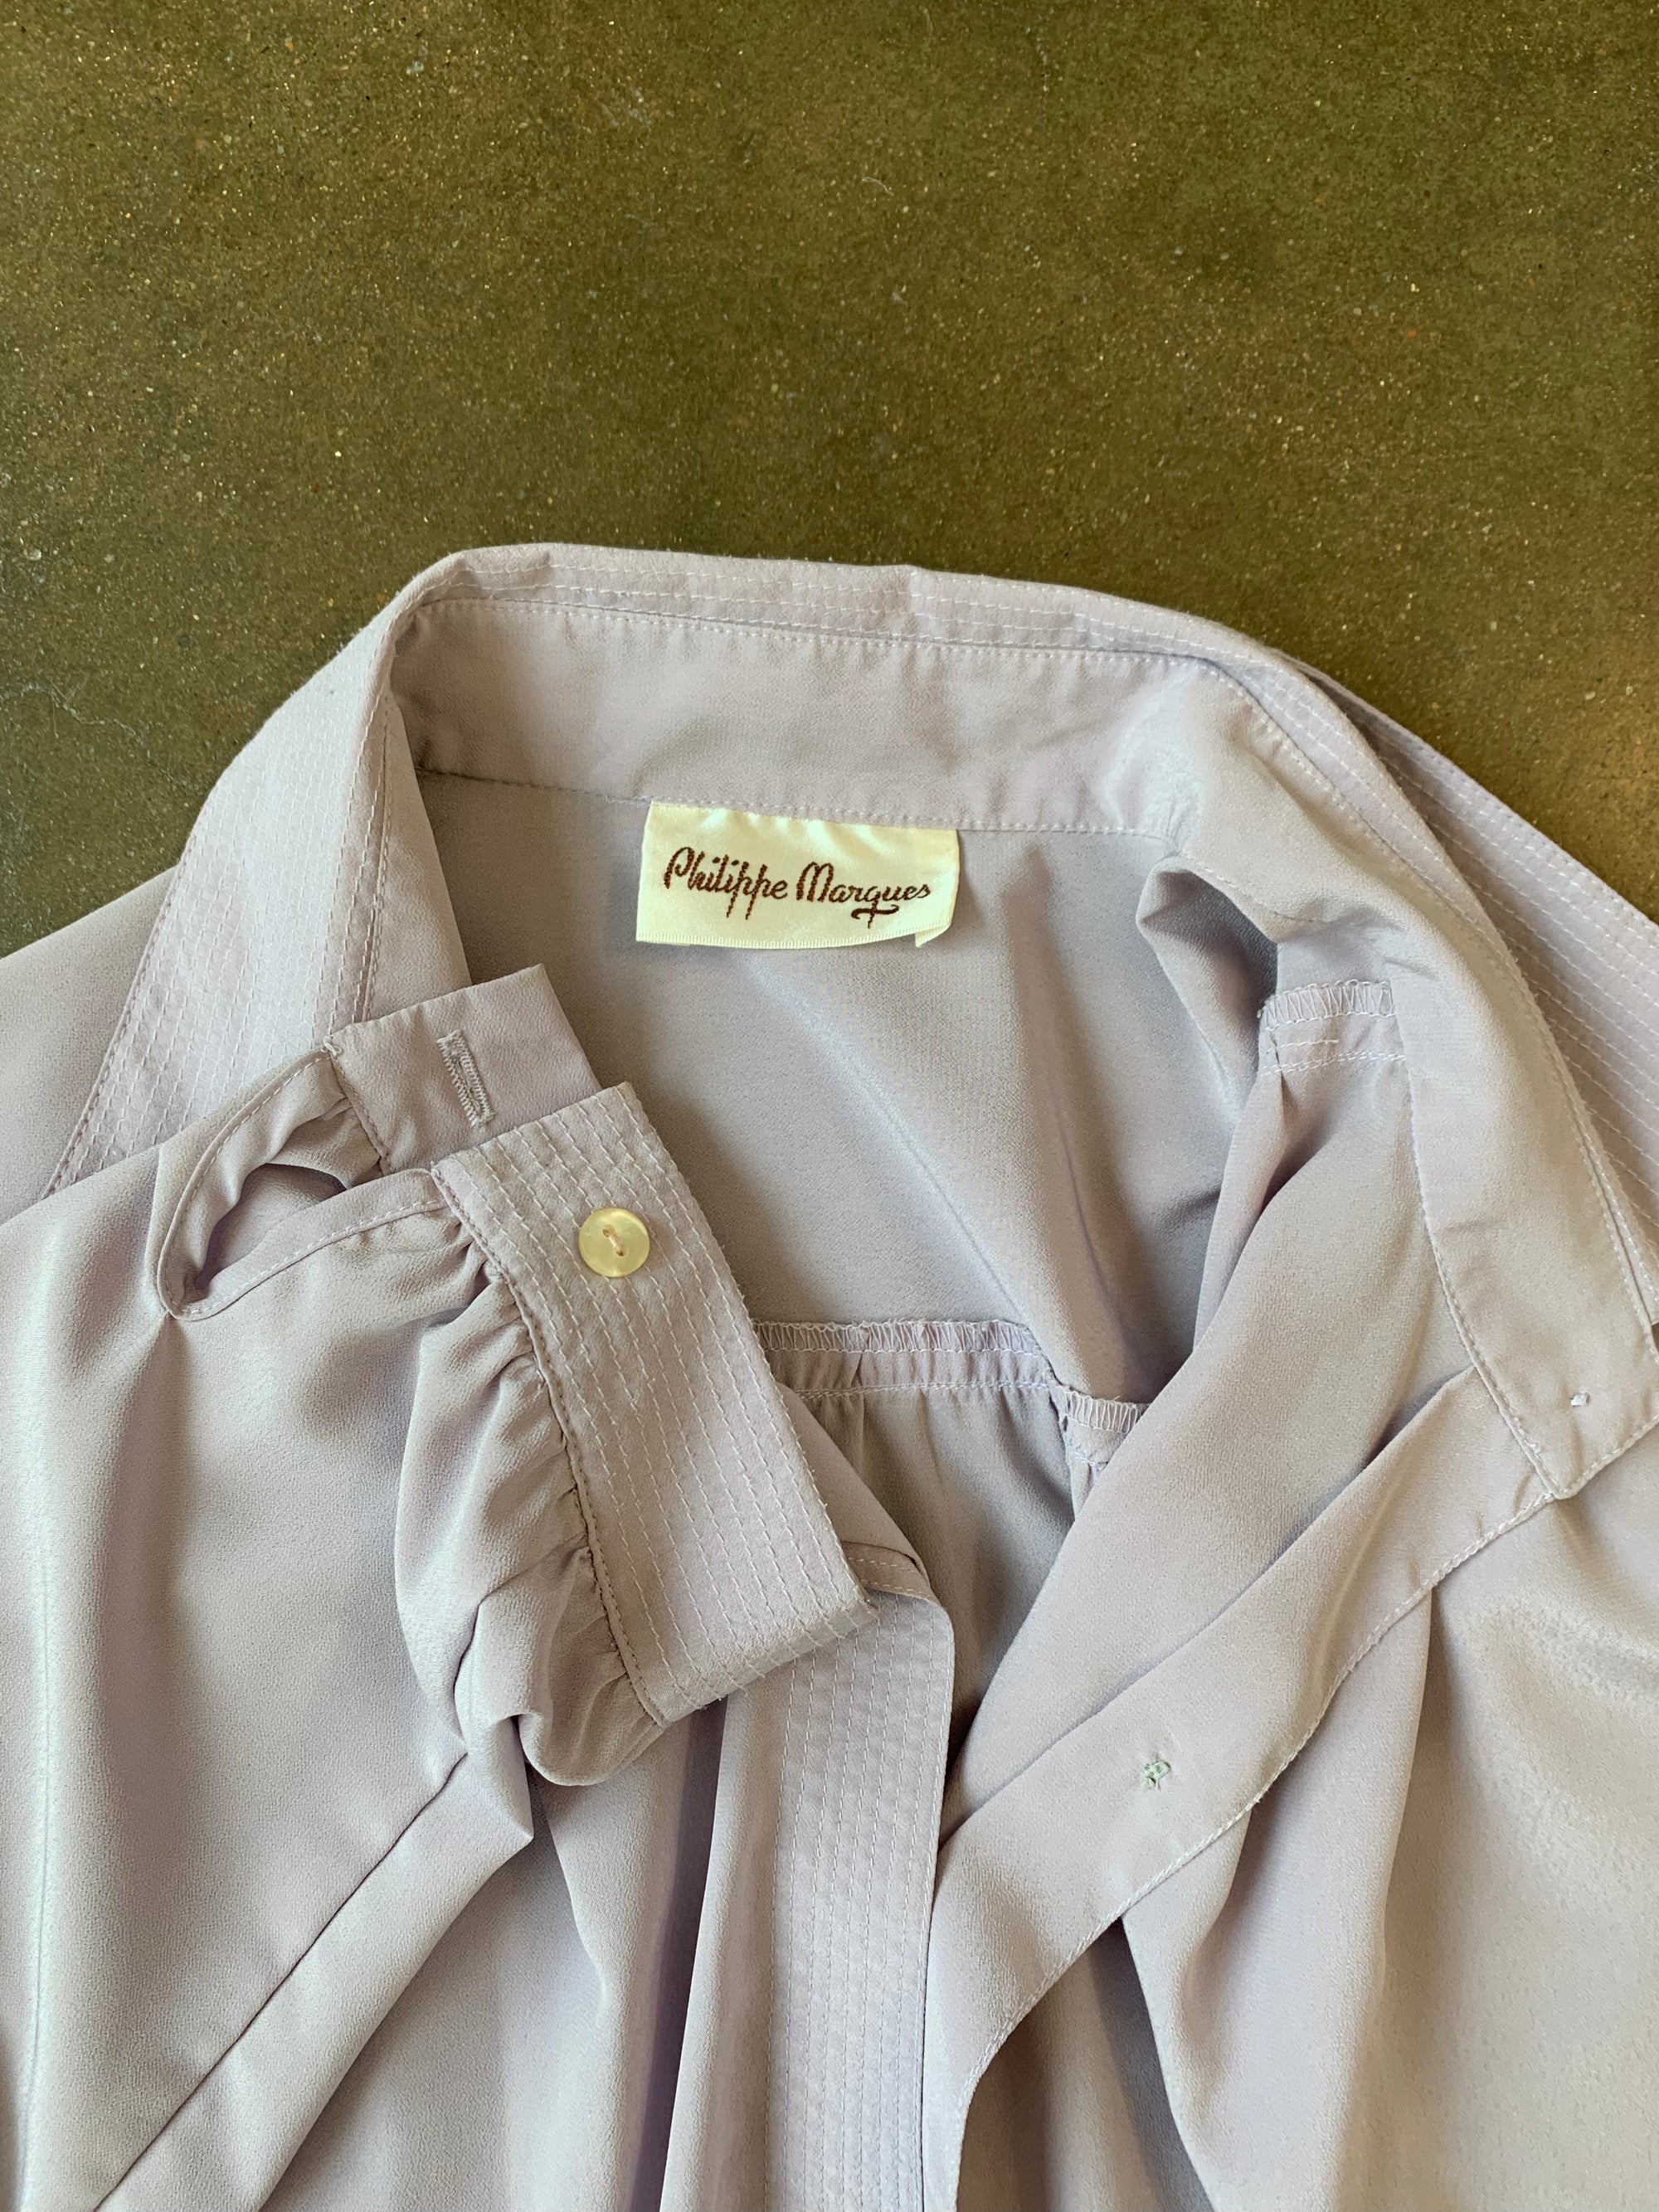 Vintage Lilac Philippe Marques Button Down